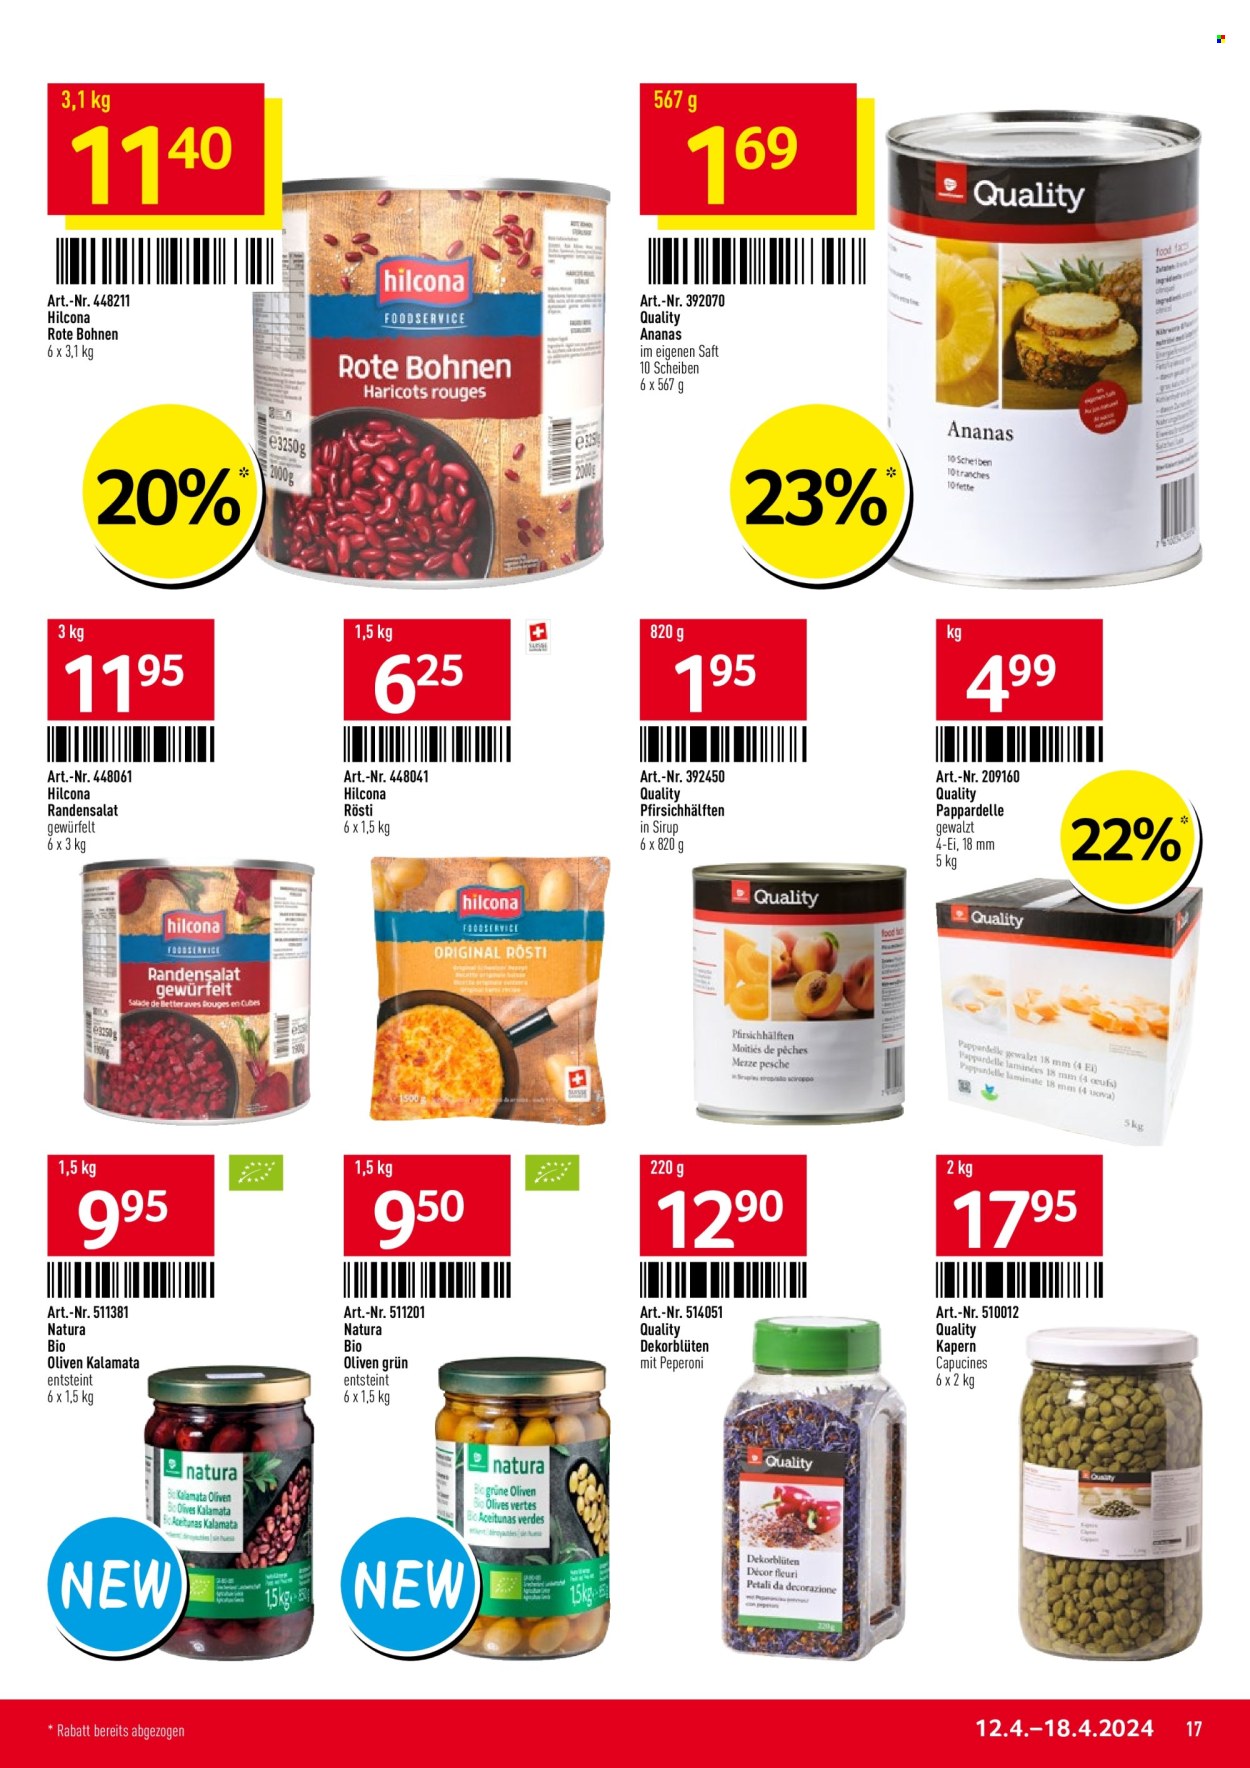 Catalogue TransGourmet - 12.4.2024 - 18.4.2024. Page 17.